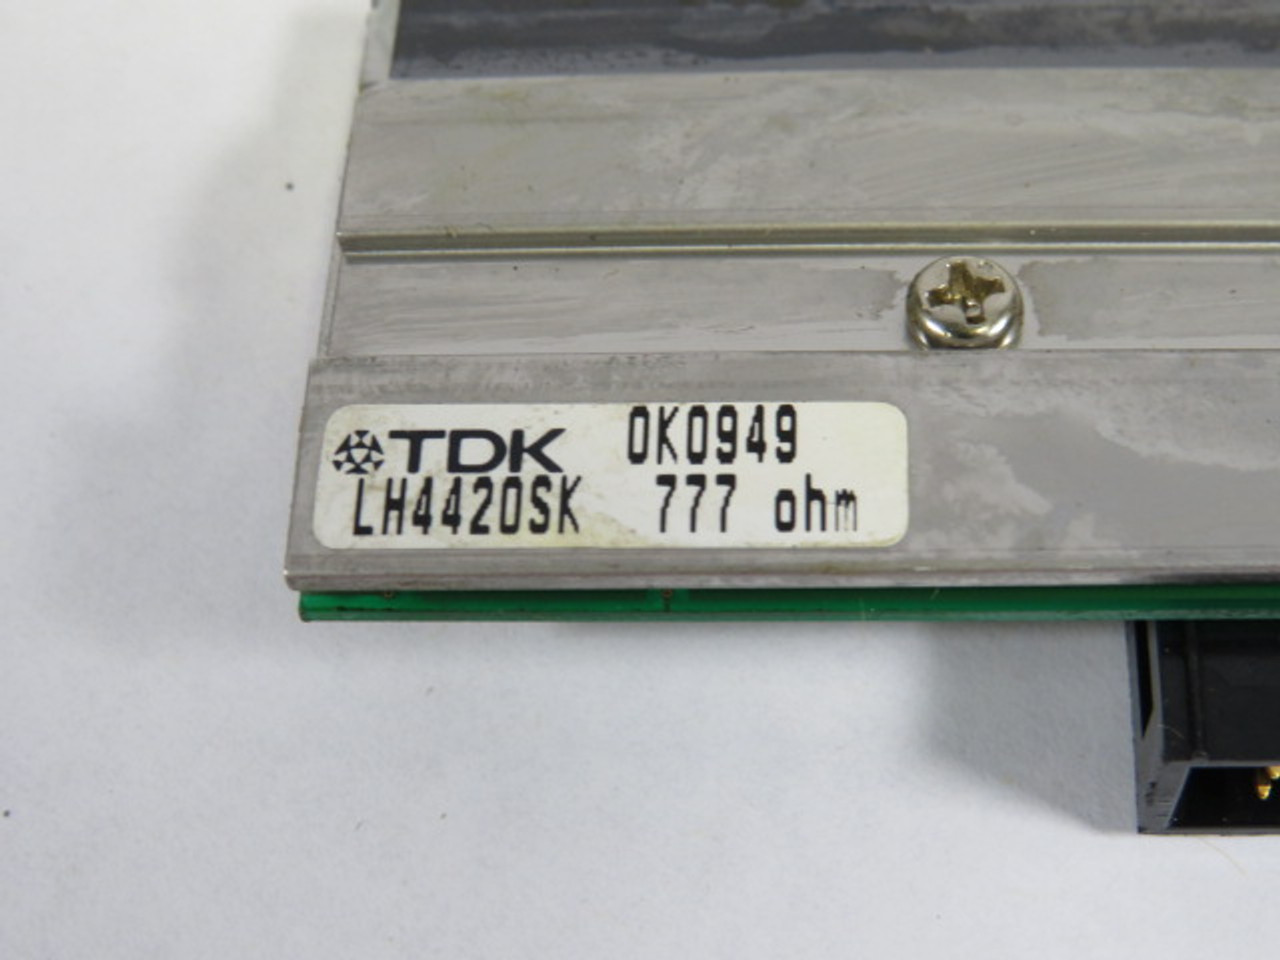 TDK LH4420SK Thermal Print Head 777 Ohm USED